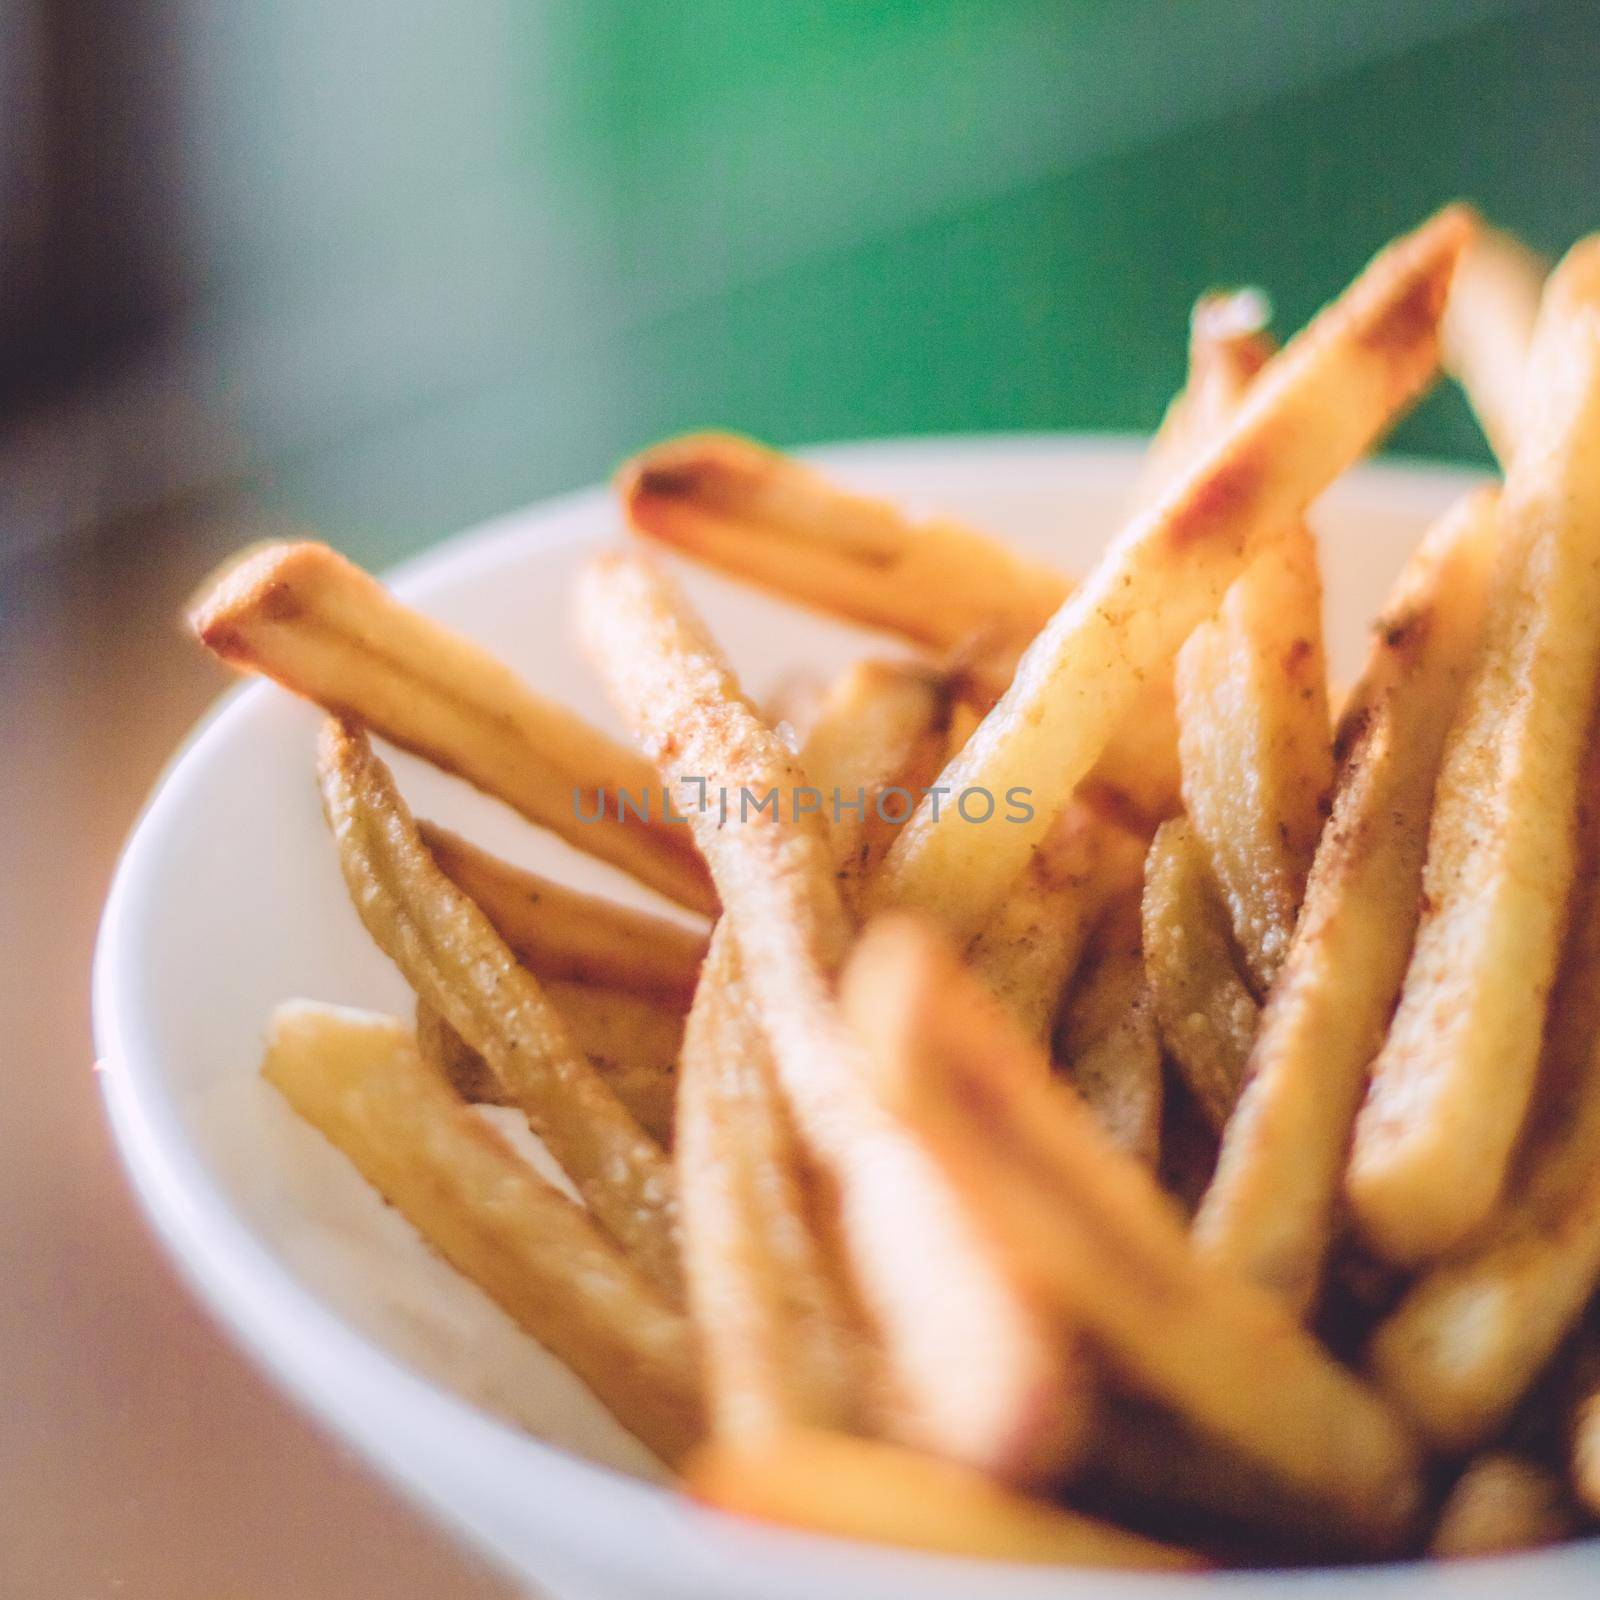 rustic food and homemade cooking styled concept - just cooked french fries served, elegant visuals